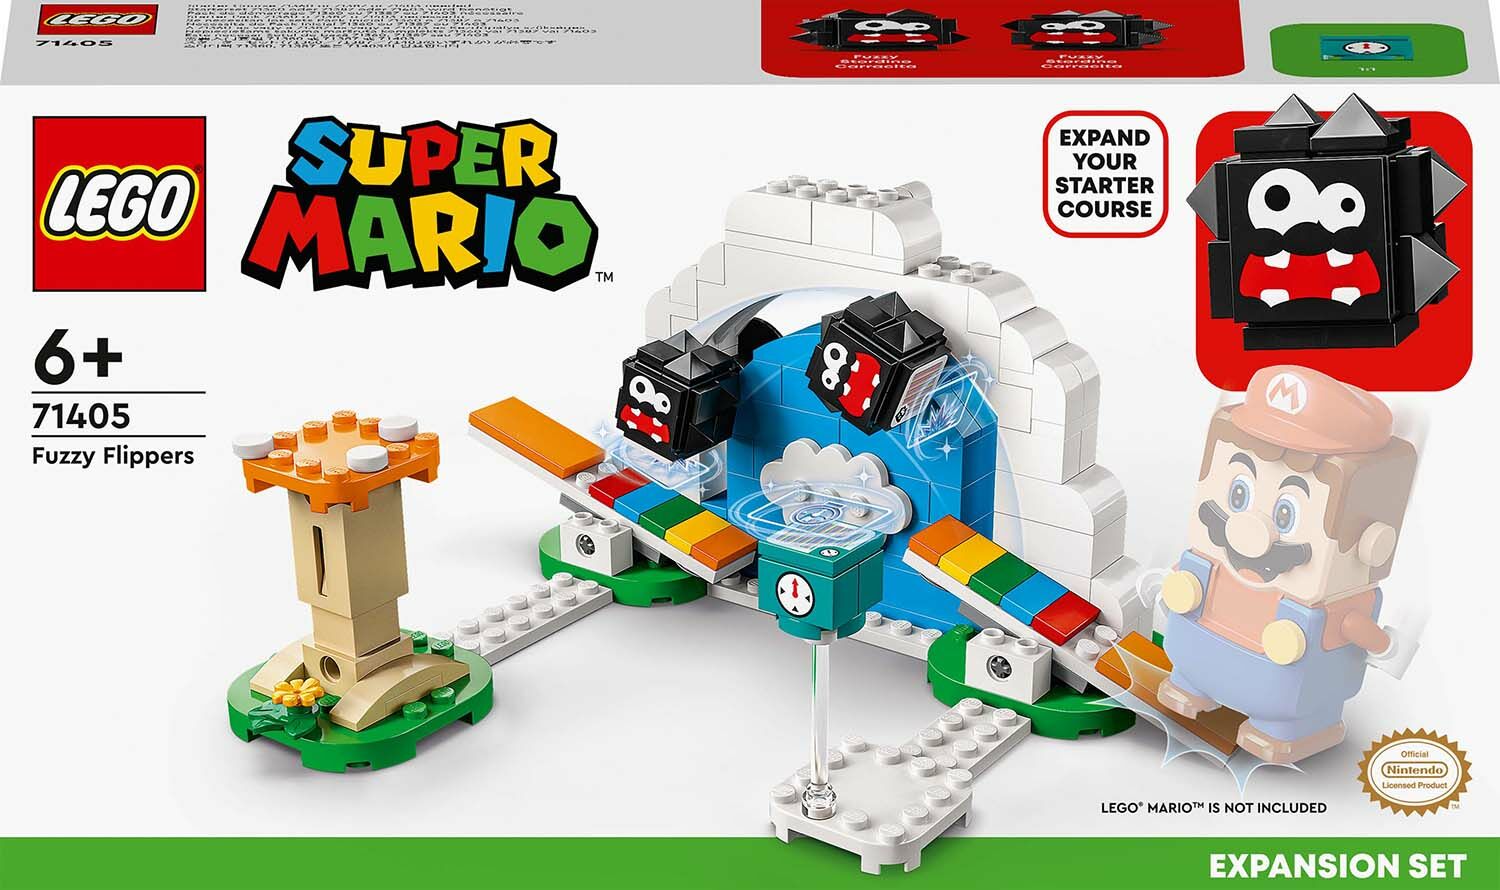 LEGO Super Mario 71405 Fuzzy Flippers – Expansionsset